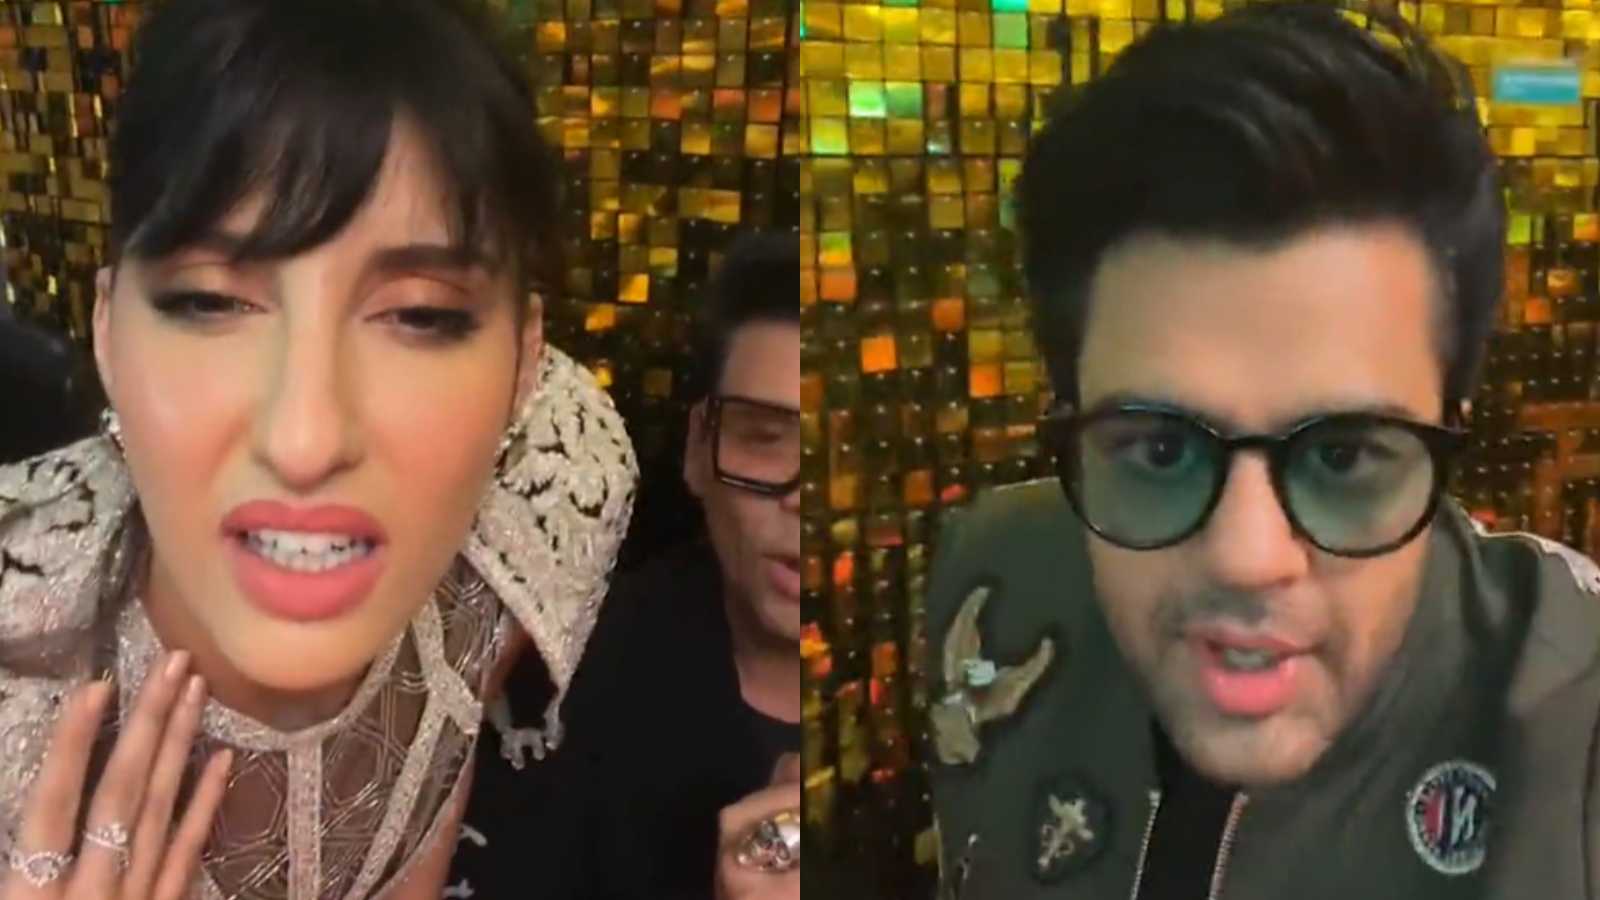 See what happened when Nora Fatehi told Maniesh Paul 'Oh my god, you're very ugly' at the Jhalak Dikhhla Jaa 10 bash